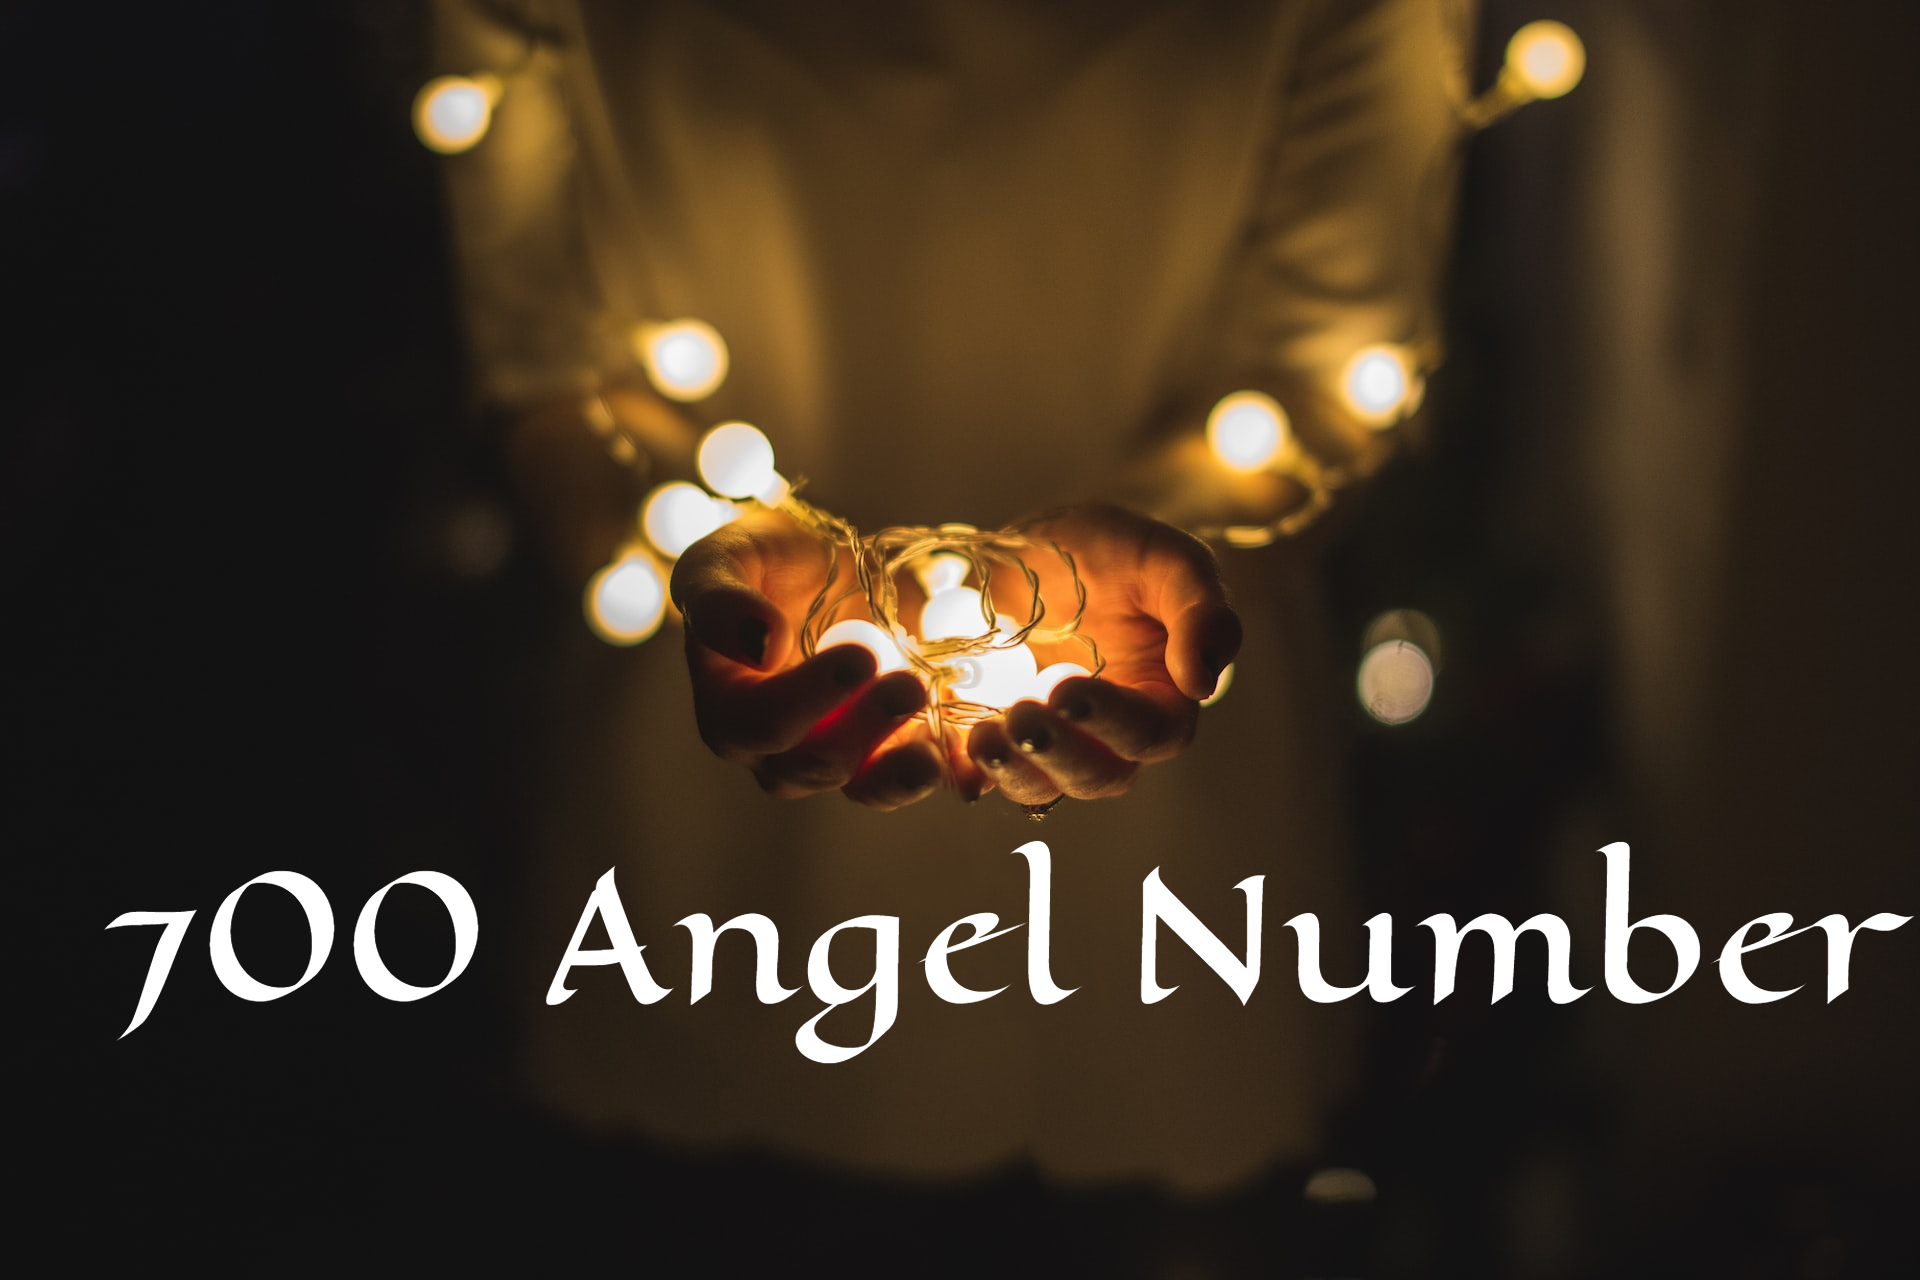 700 Angel Number - Symbolizes Your Enlightenment And Spiritual Awakening